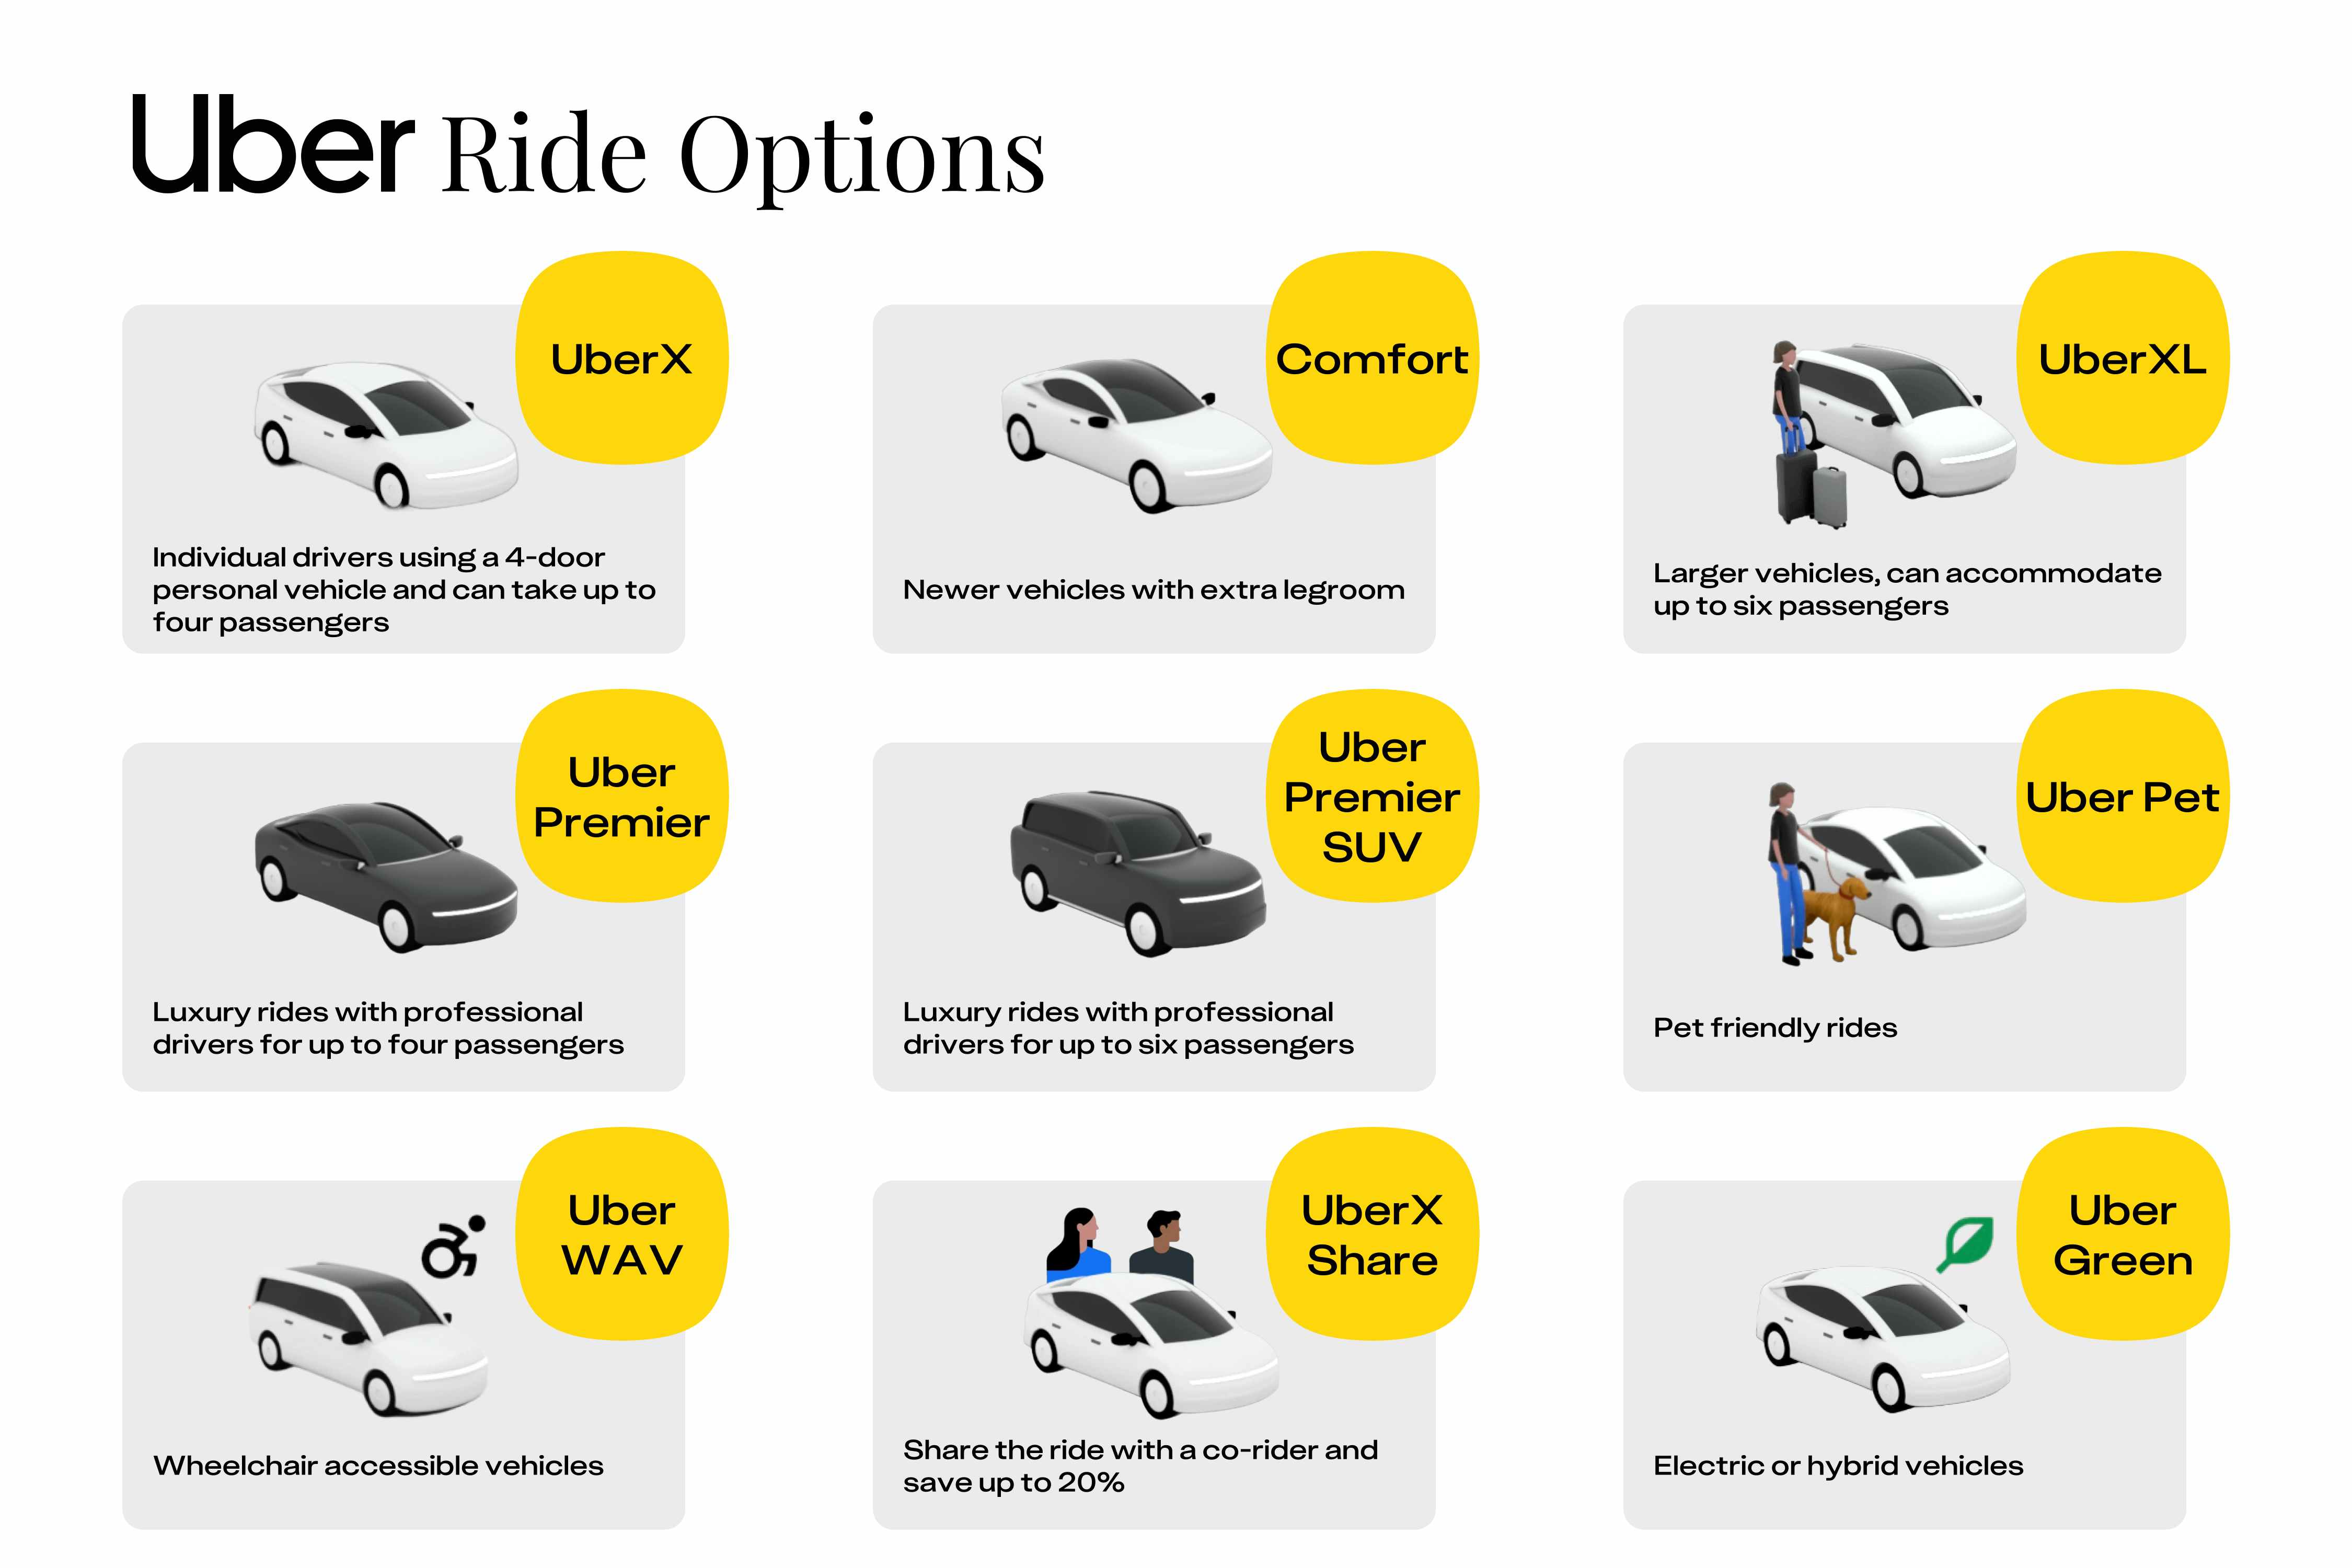 all of the uber ride options available. UberX: Individual drivers using a 4-door personal vehicle and can take up to four passengers Comfort: Newer vehicles with extra legroom. UberXL: Larger vehicles, can accommodate up to six passengers Uber Black: Luxury rides with professional drivers for up to four passengers Uber Black SUV: Luxury rides with professional drivers for up to six passengers Uber Pet: Pet friendly rides. Uber WAV: Wheelchair accessible vehicles UberX Share: Share the ride with a co-rider and save up to 20% Uber Green: Electric or hybrid vehicles.